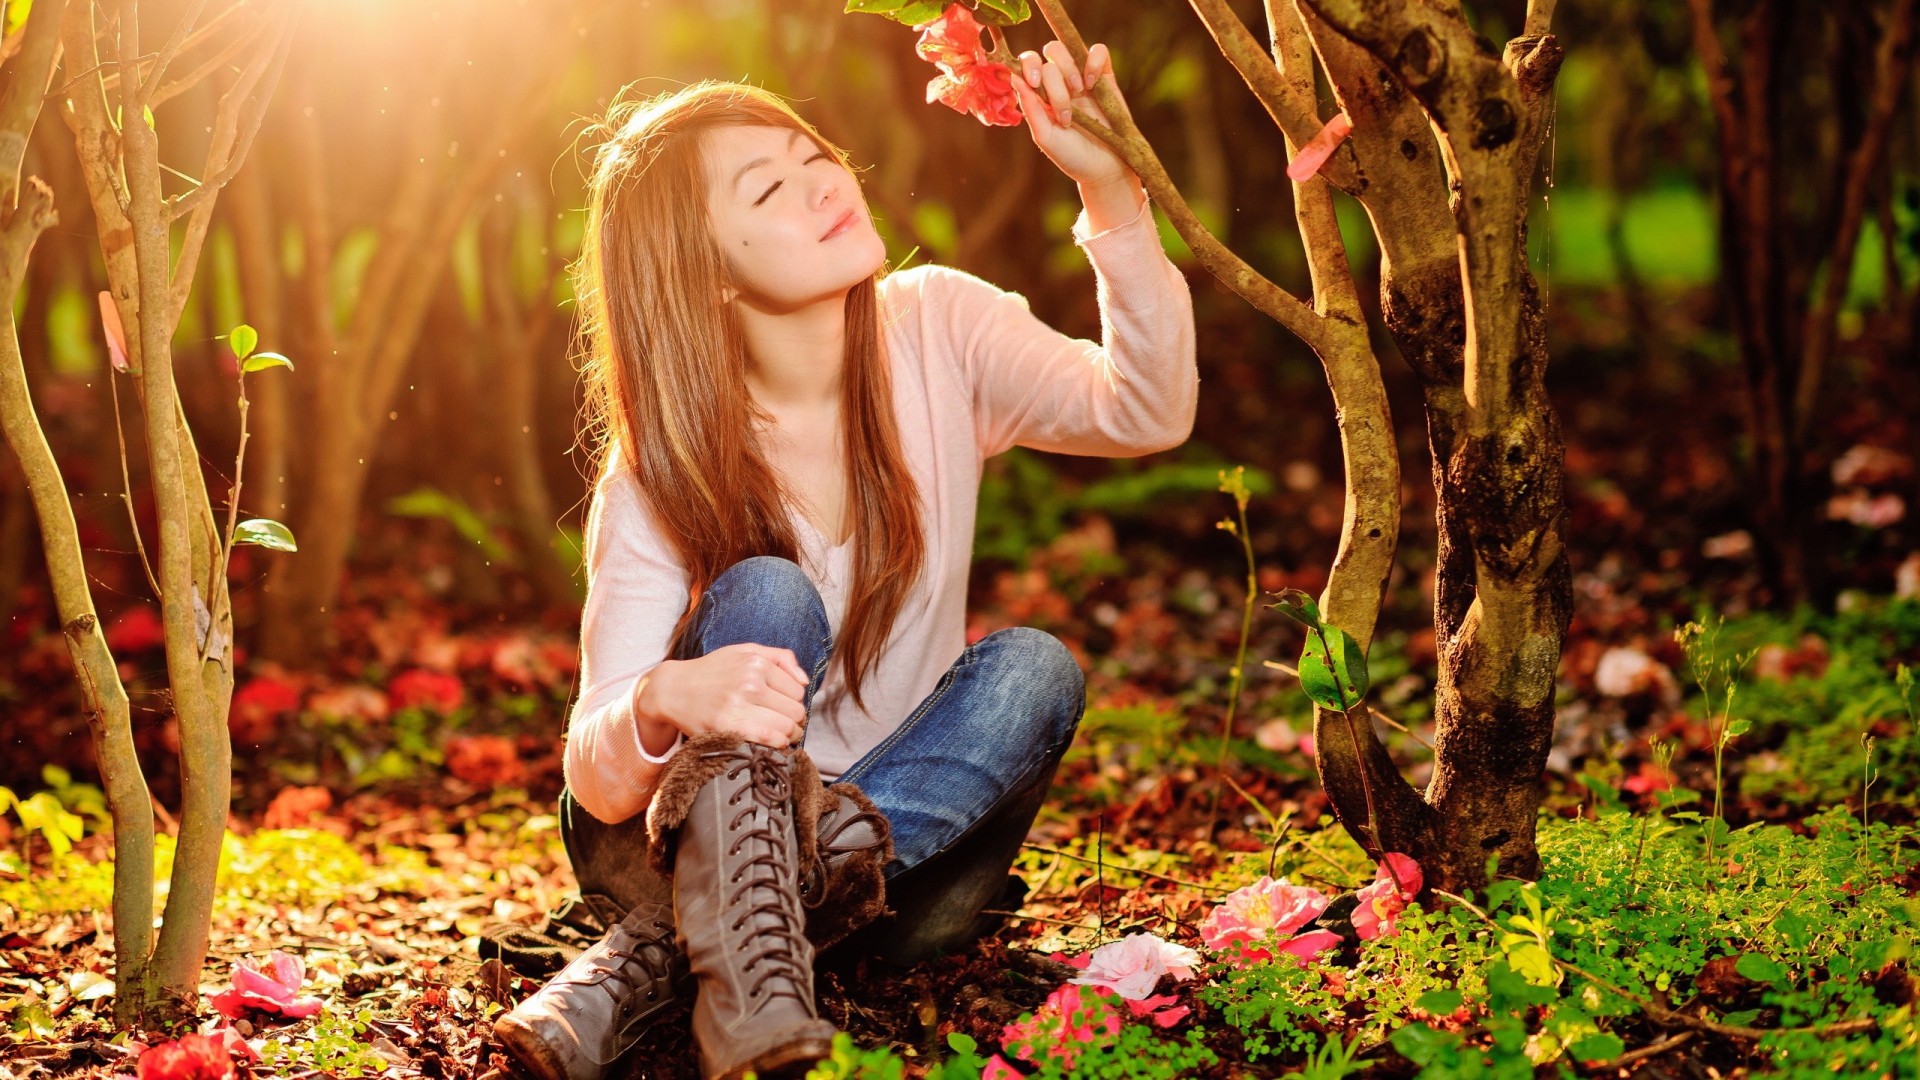 A girl sits on the ground under a bright sun in the forest